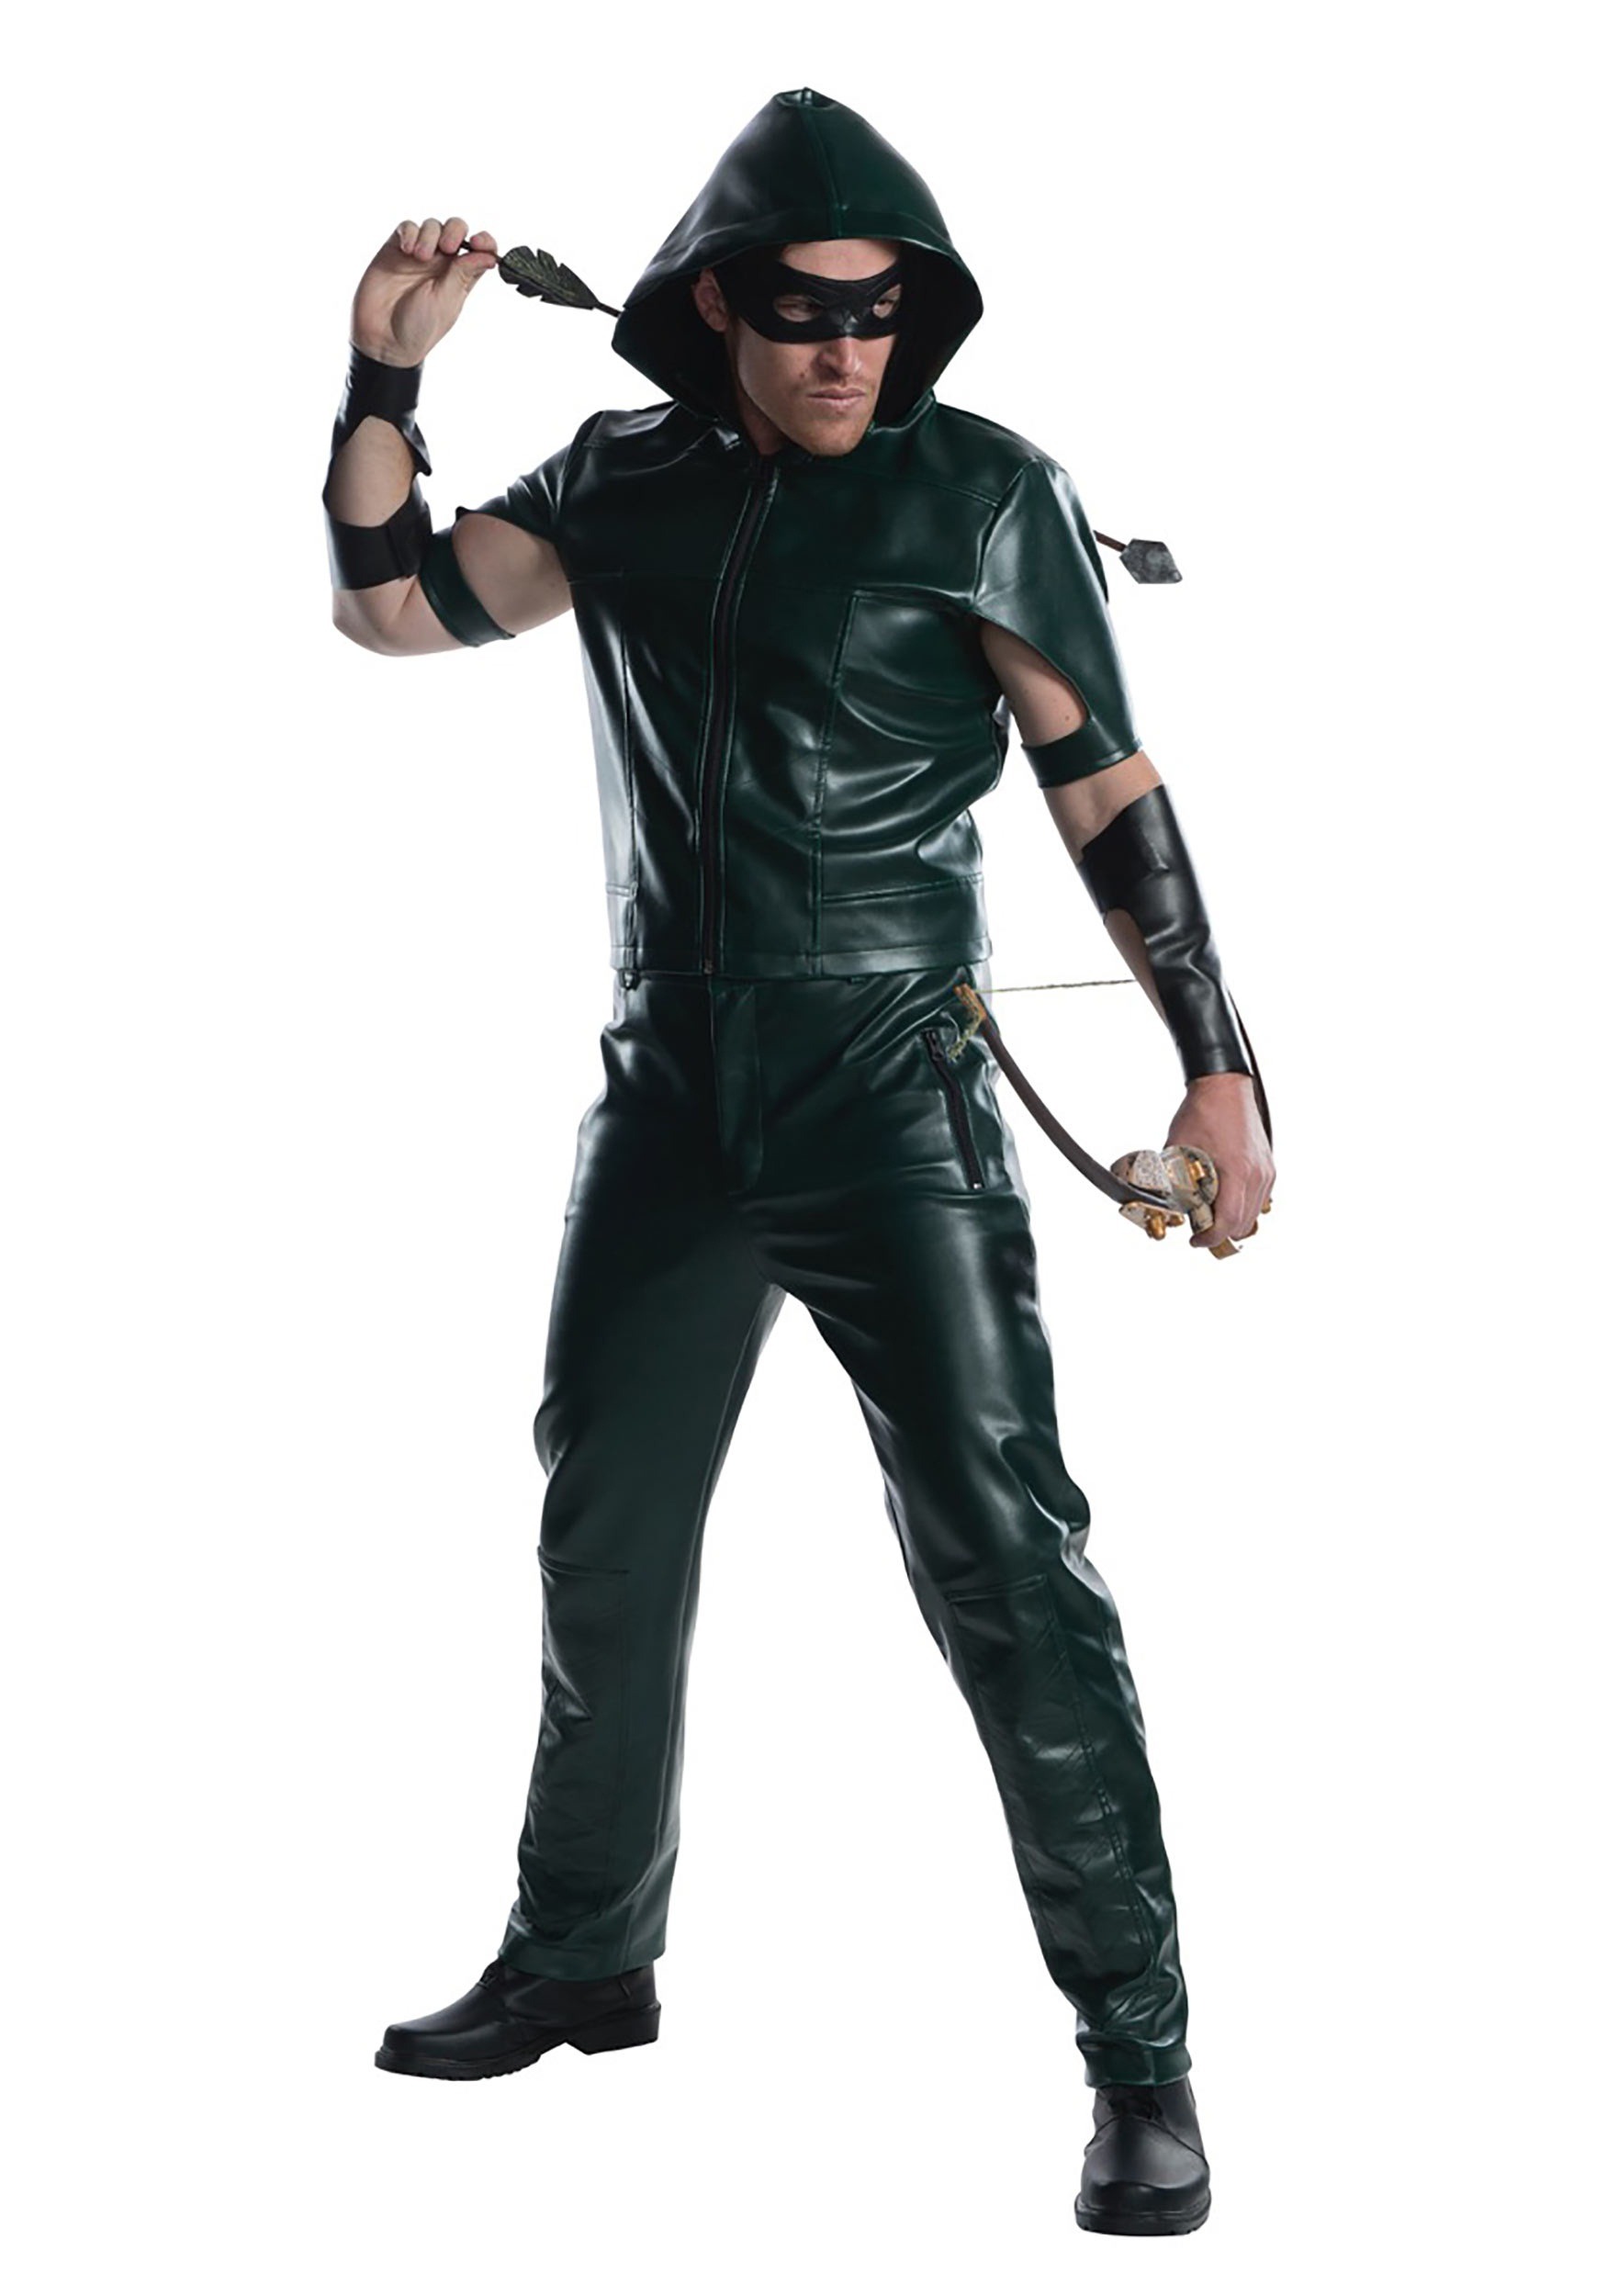 Image of Adult Deluxe Arrow Costume ID CH03202-M